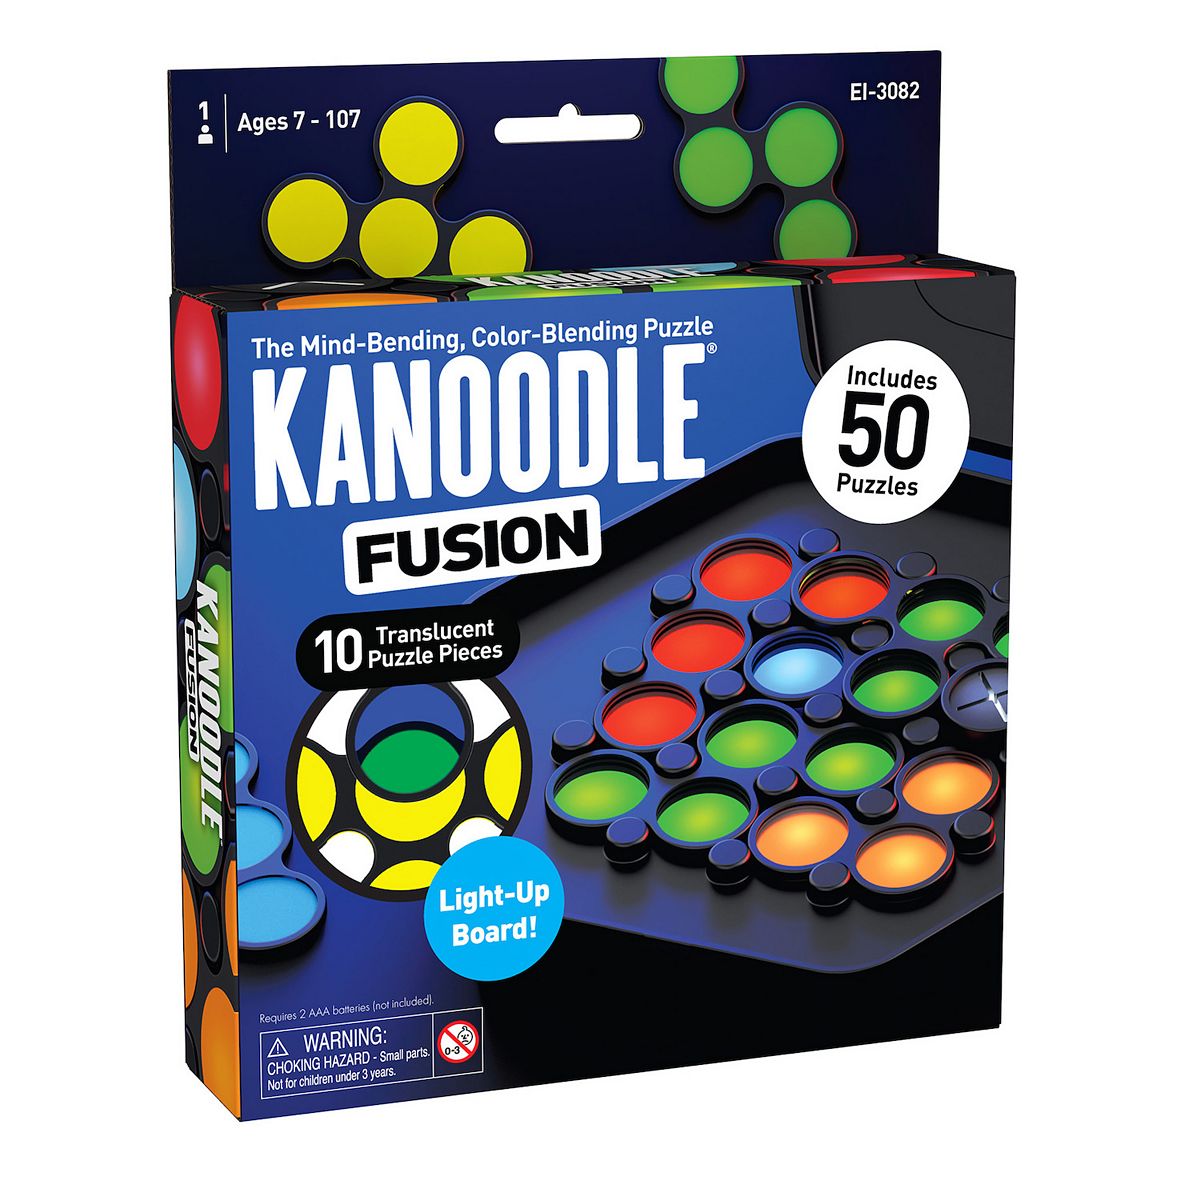 Educational Insights Kanoodle 100+ Brain Teasing Twisting 3-D Puzzle Game